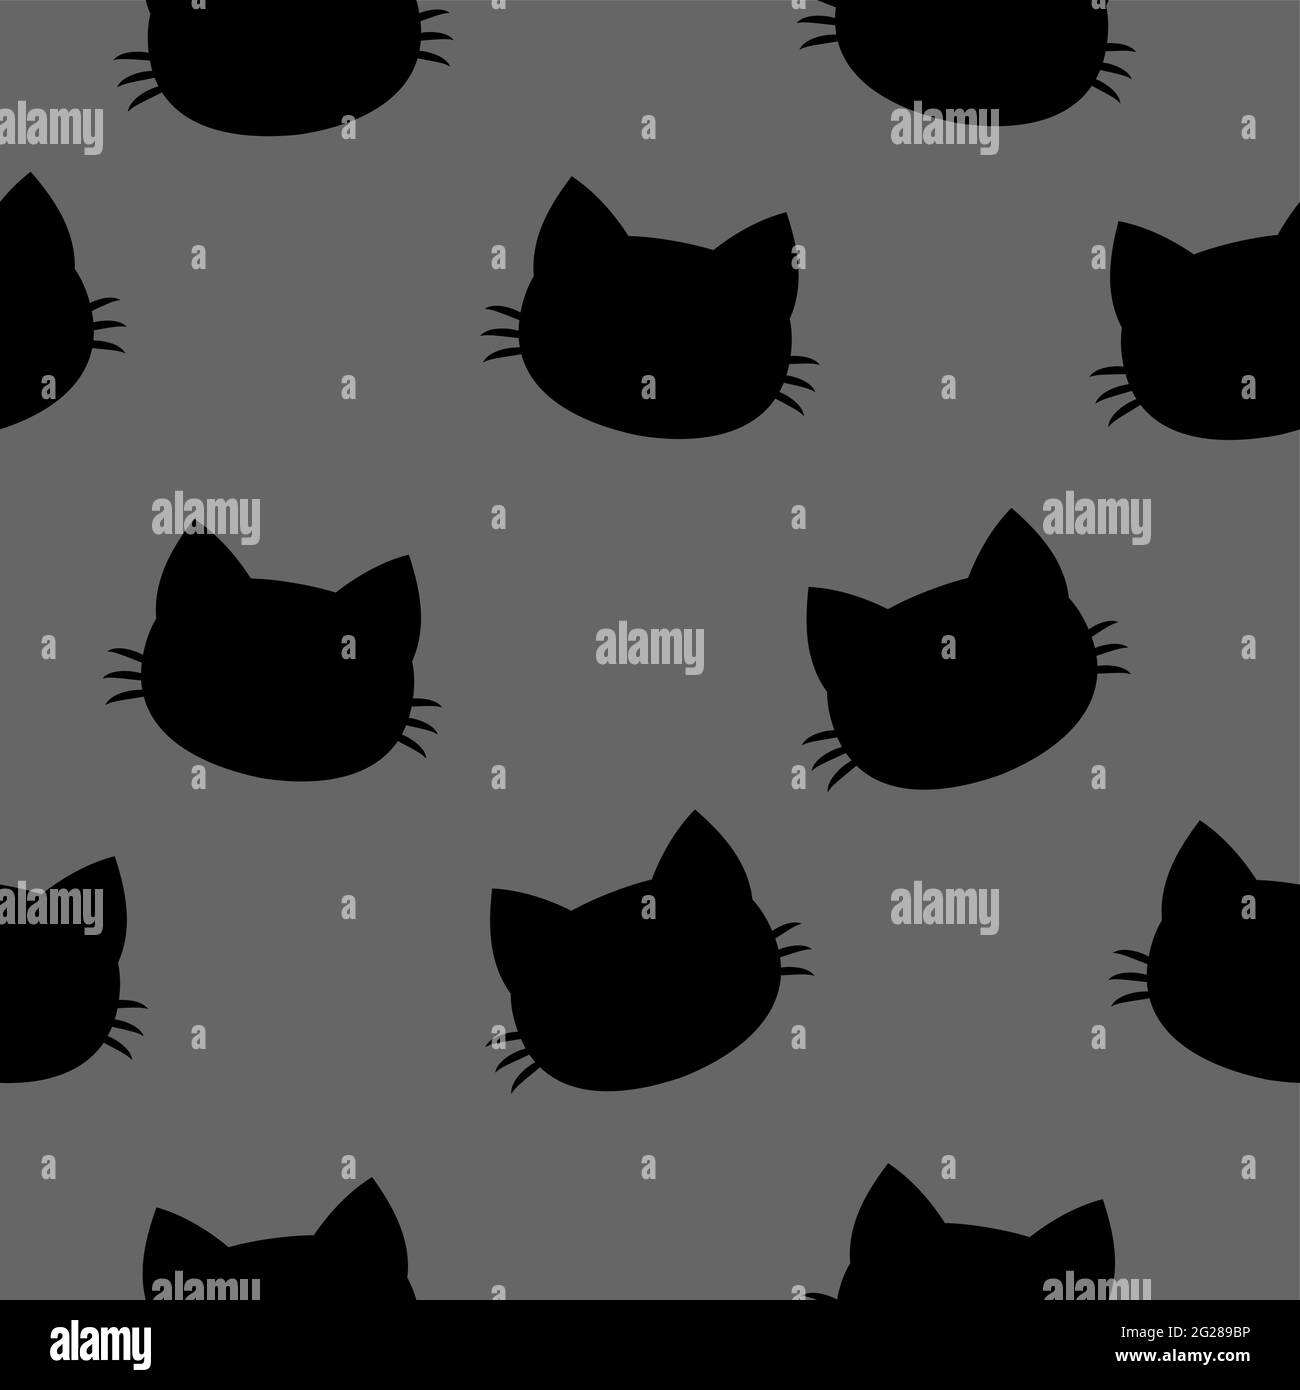 Wallpaper cat drawing bigeyed moon nature hd picture image